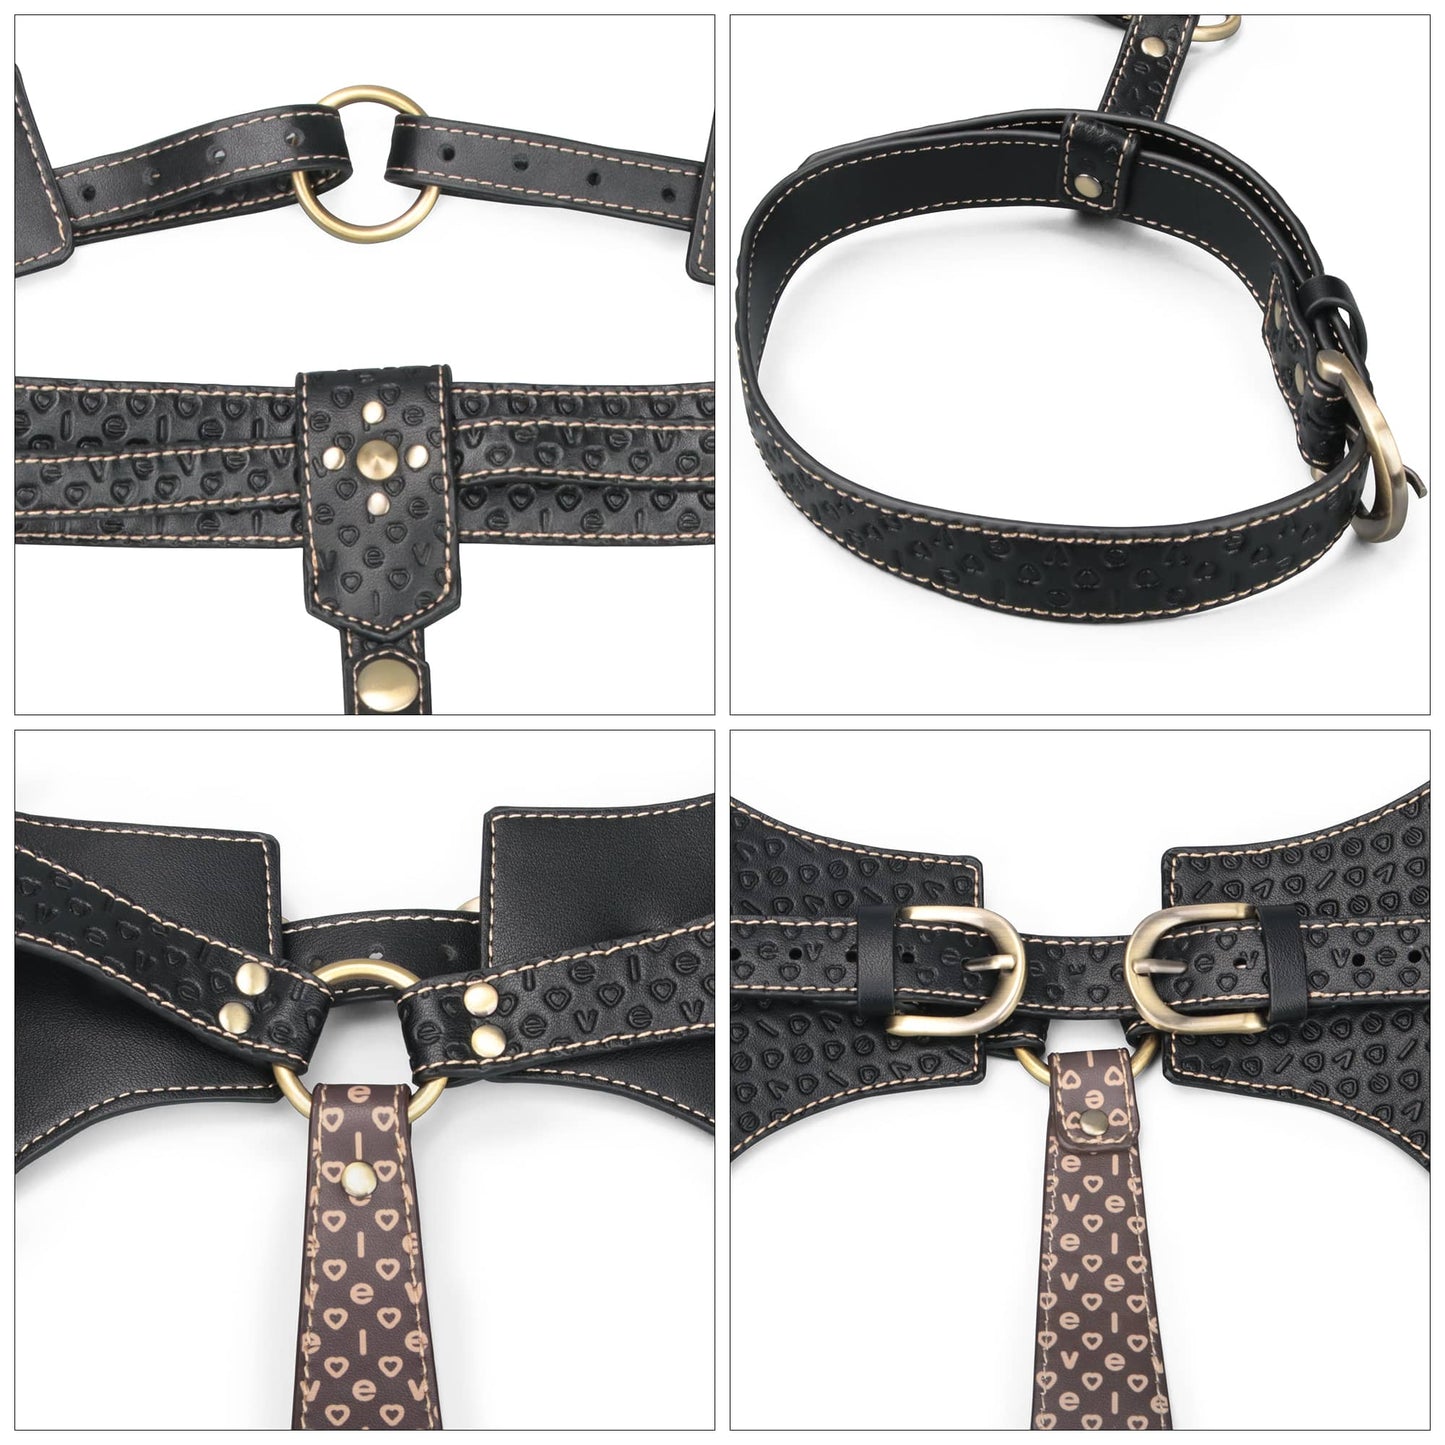 The rebellion reign full body harness is engineered for adjustability with metal buckles and O-rings